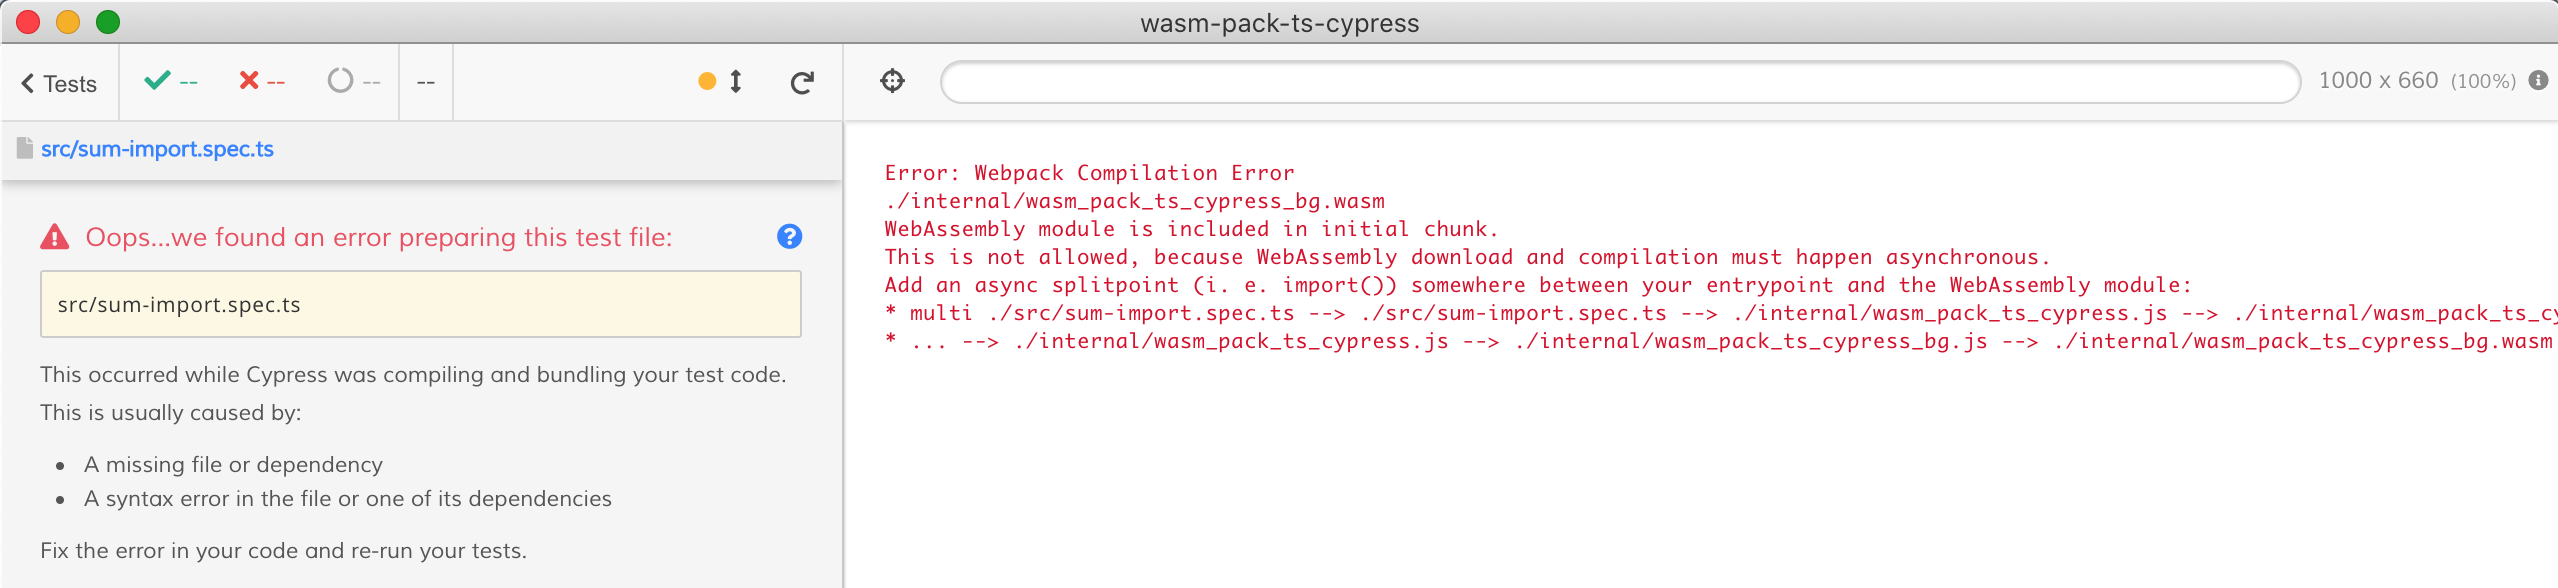 Direct WASM import into Cypress fails